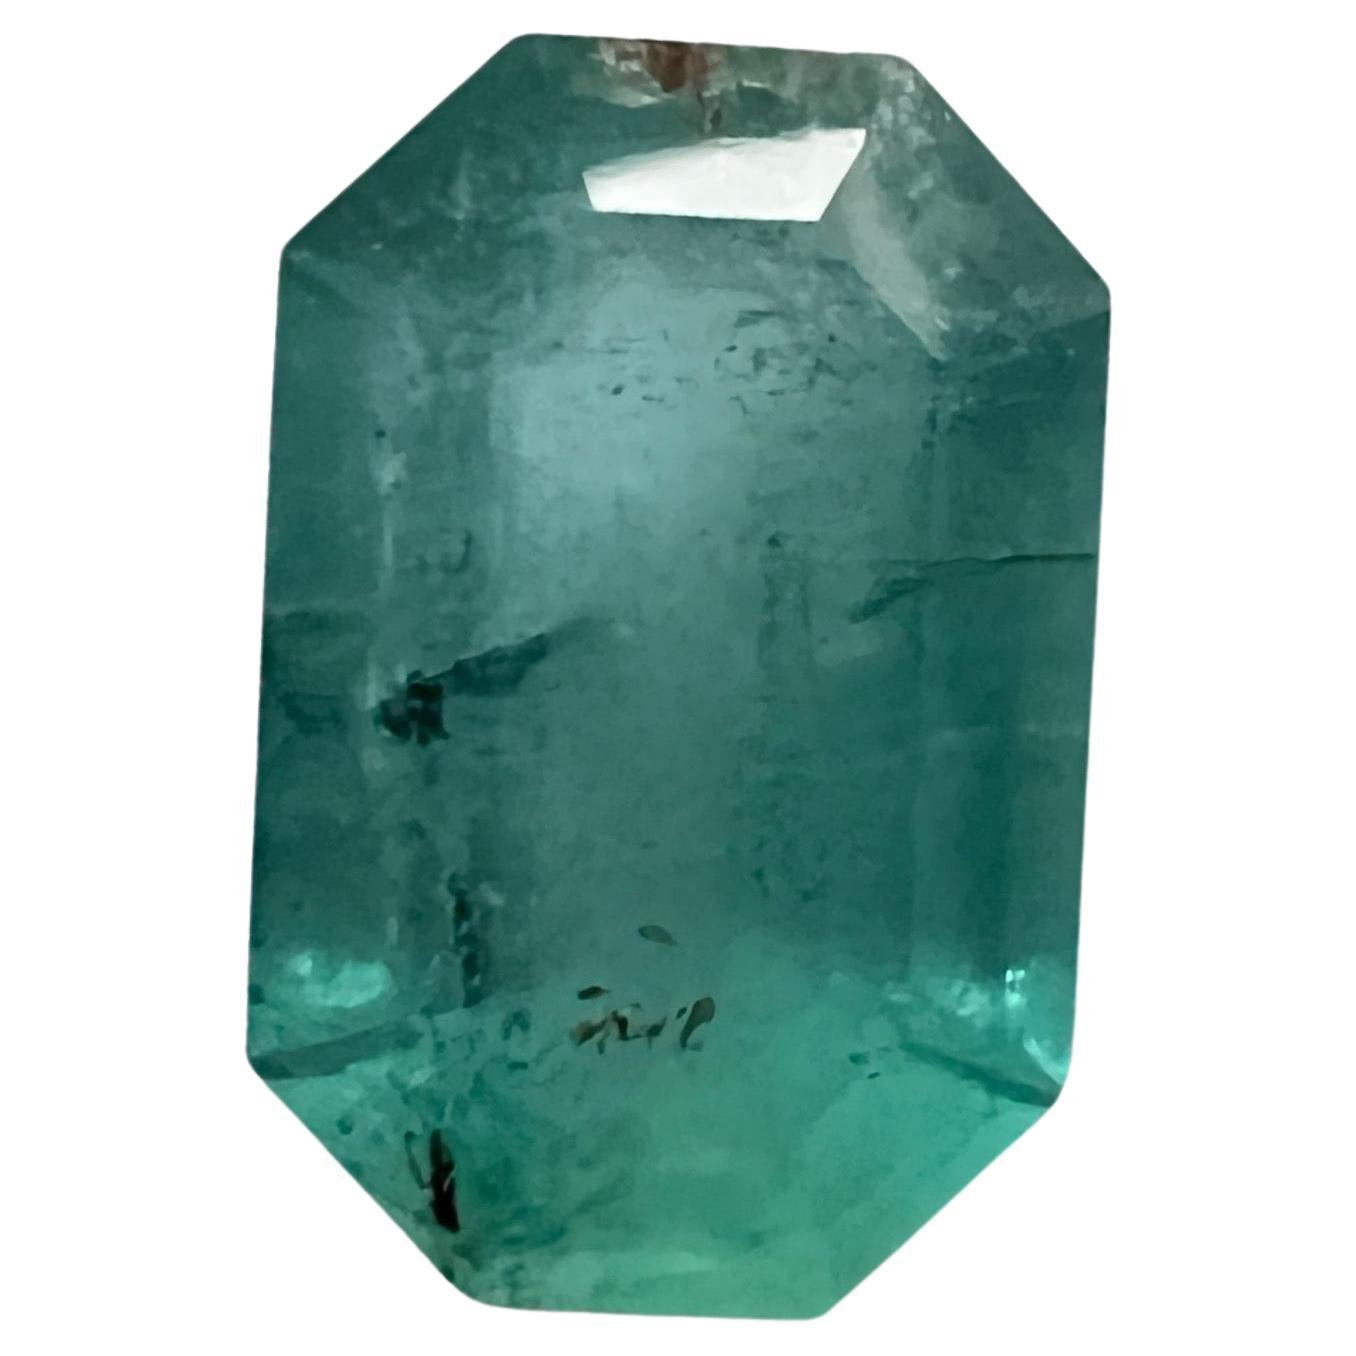 Introducing our exquisite 2.70ct Non-Oil Natural Blue Green Emerald Loose Gemstone, a treasure for both jewelry designers and gemstone collectors. 

This captivating gem, measuring 9mm by 7mm, boasts a mesmerizing blend of blue and green tones that